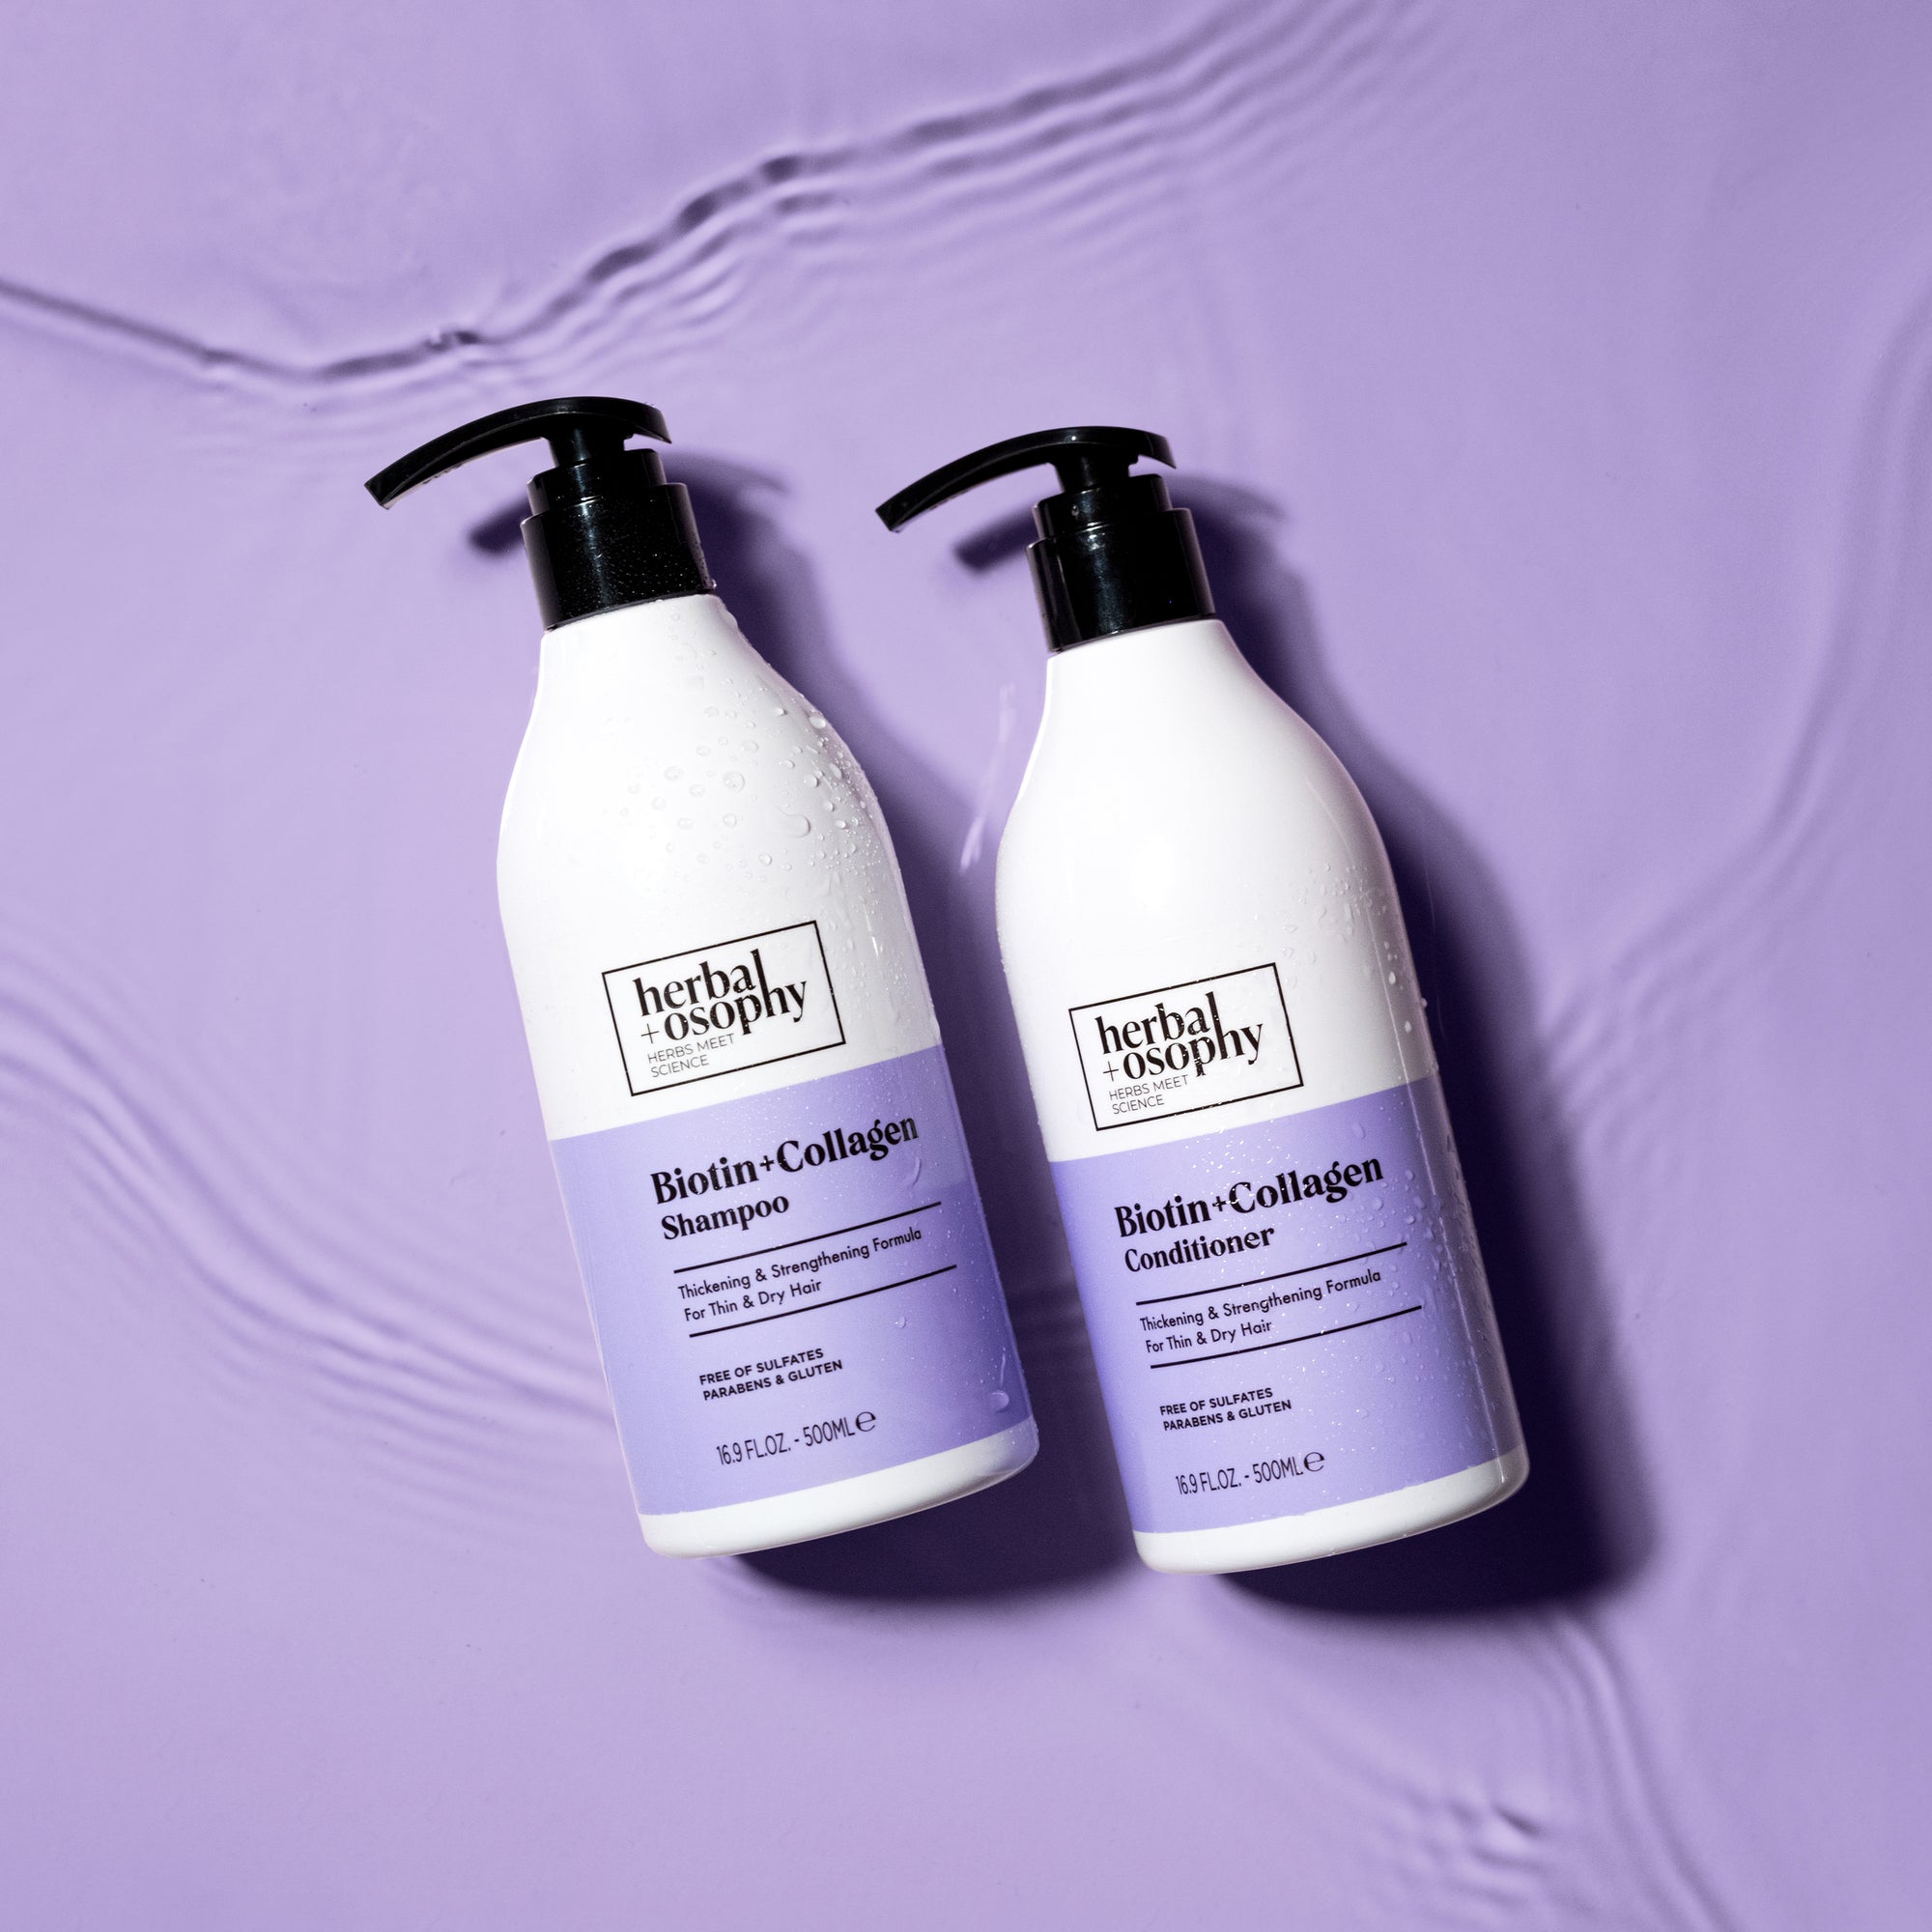 Biotin + Collagen Shampoo and Conditioner bottles on purple background with rippling water